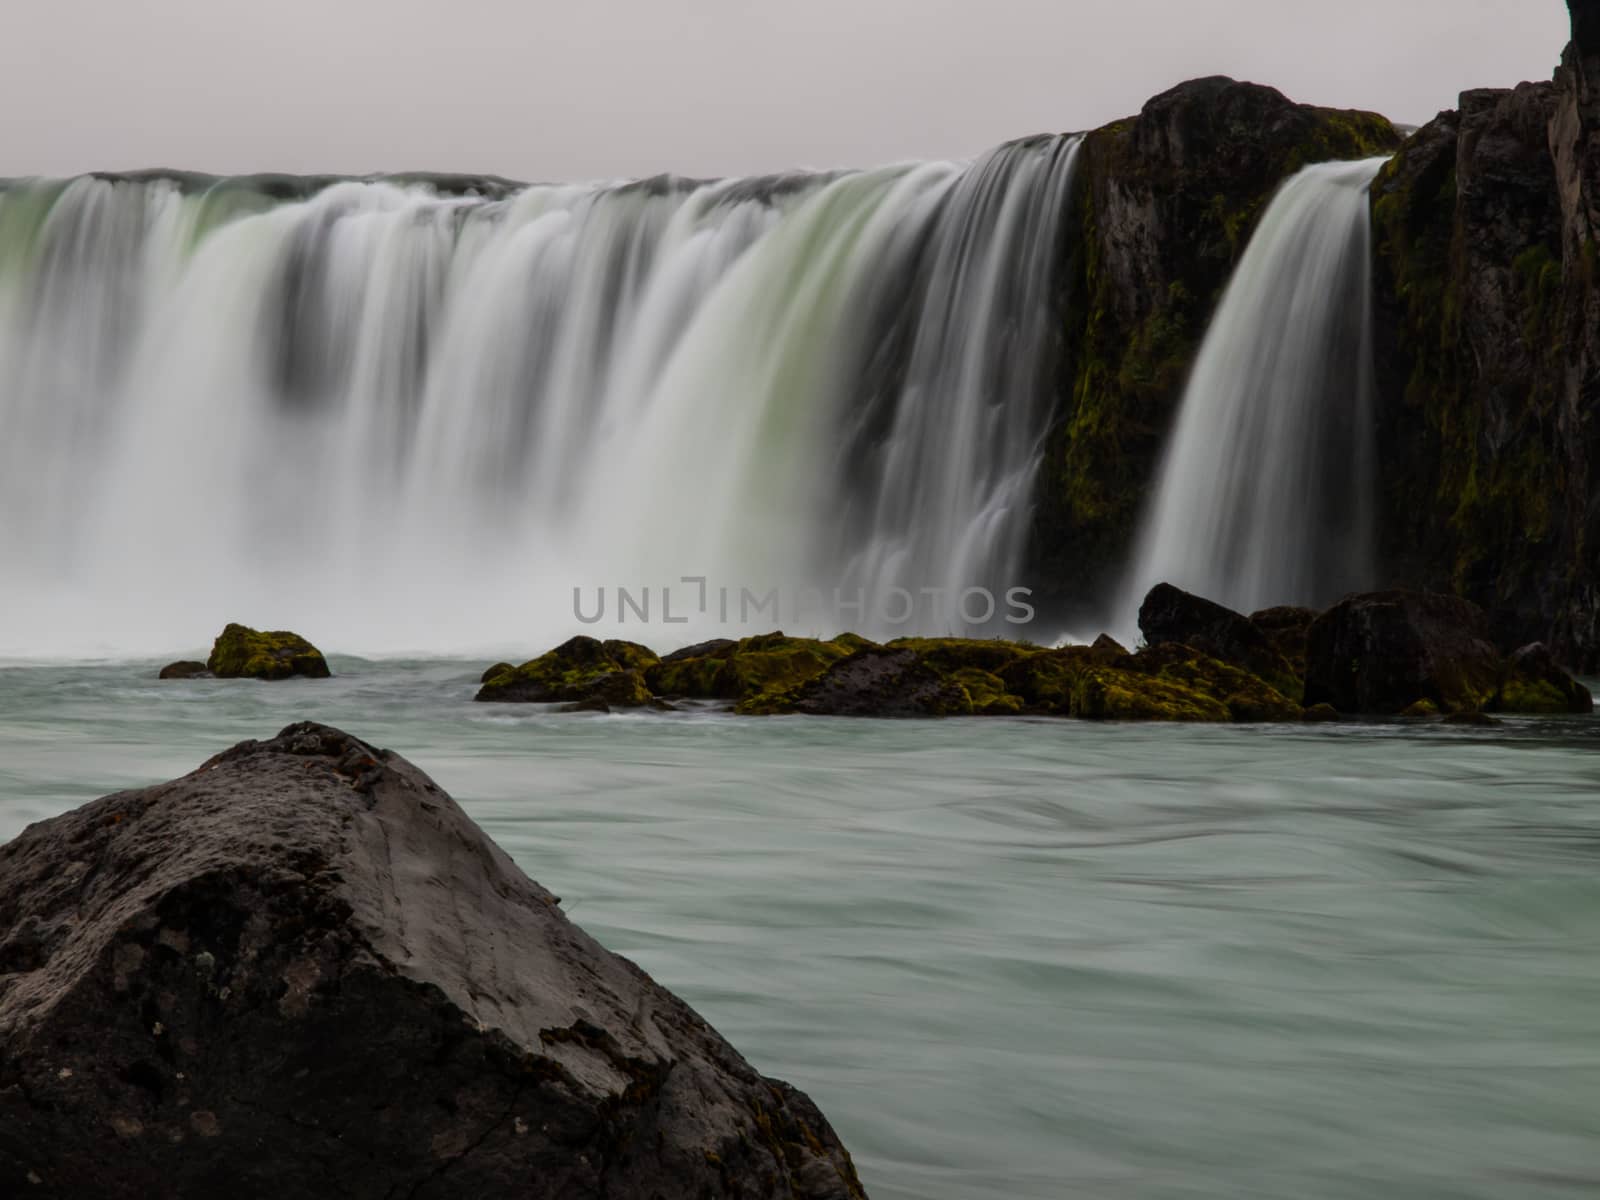 Godafoss - one of the most popular waterfalls in Iceland